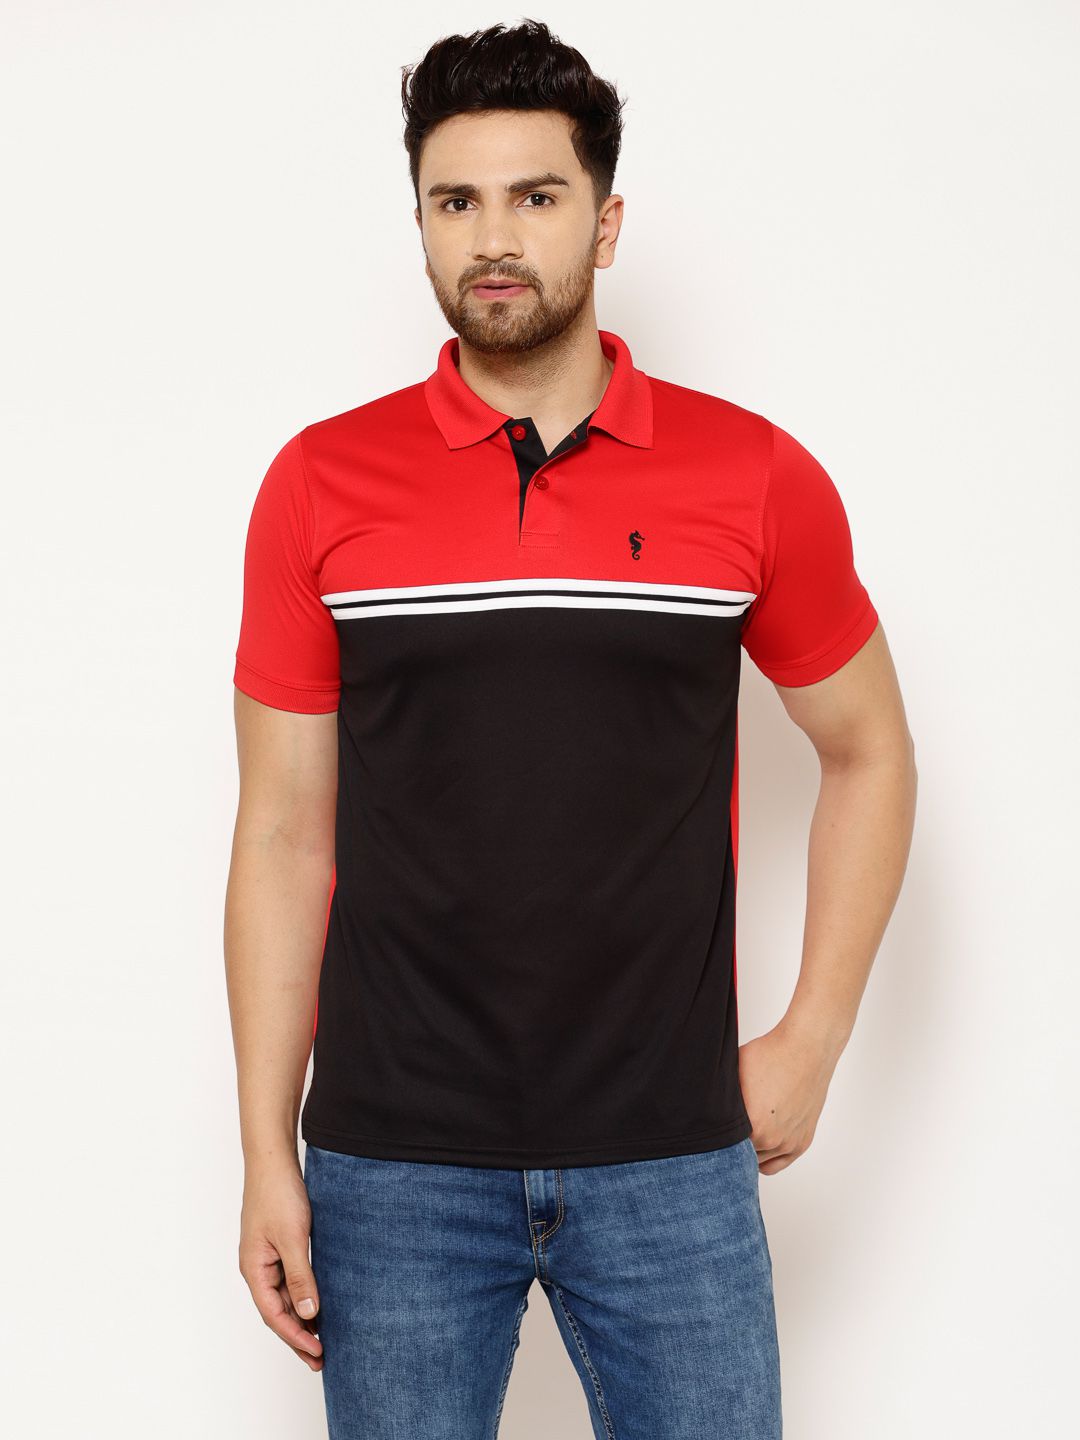     			EPPE - Red Polyester Regular Fit Men's Sports Polo T-Shirt ( Pack of 1 )